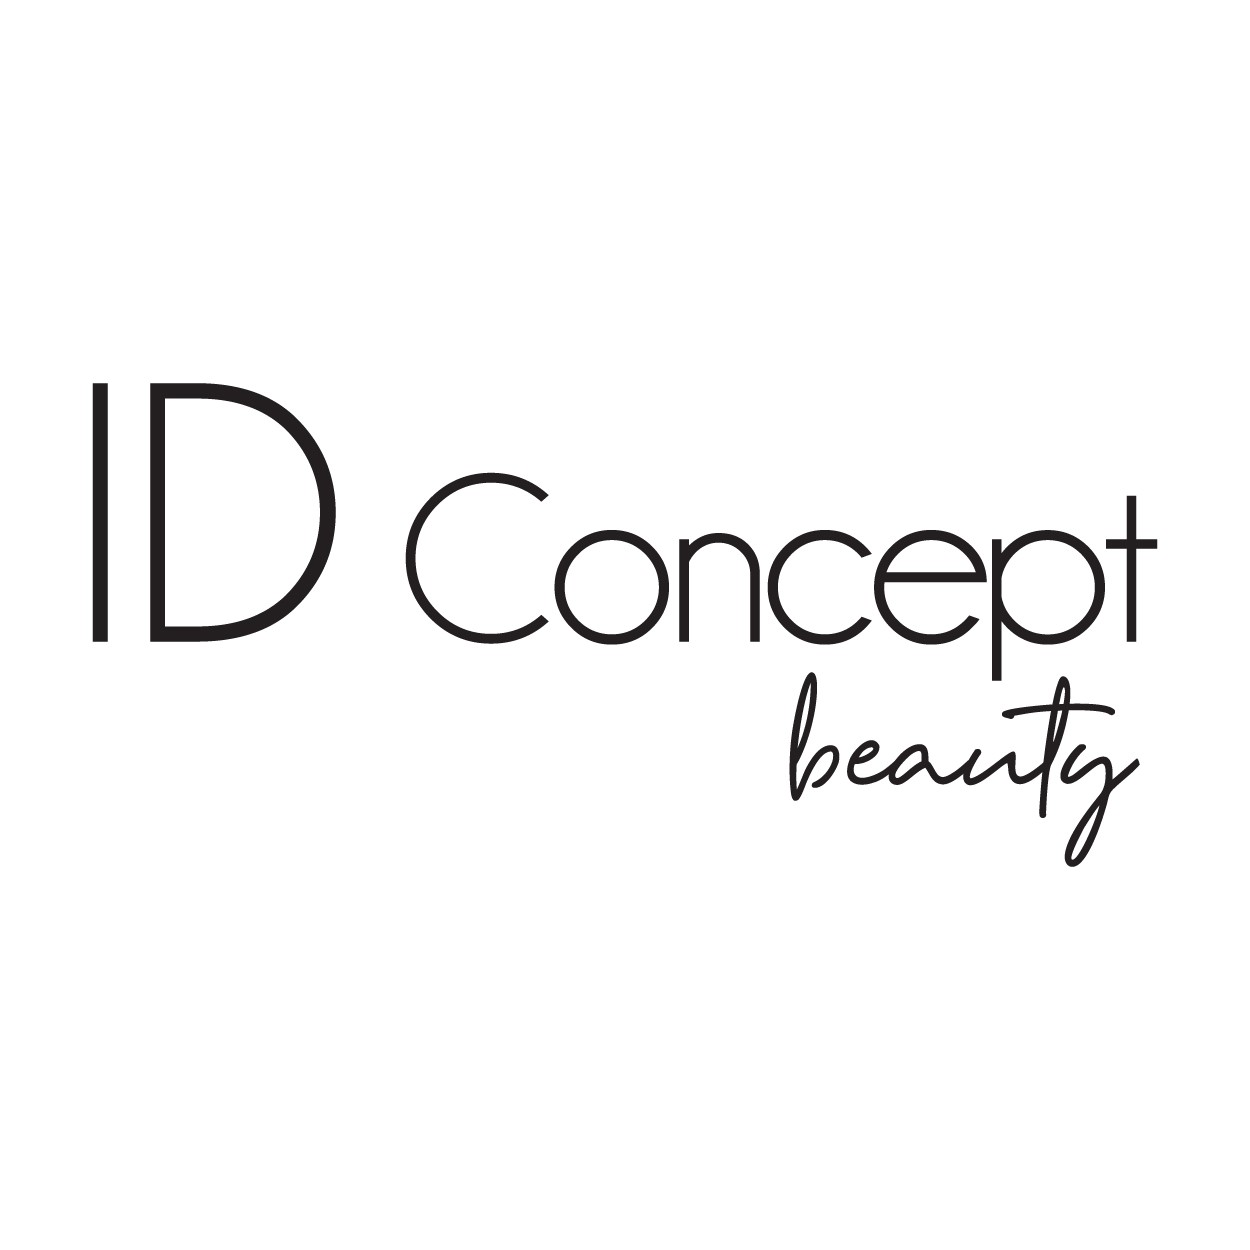 id-conceot-beauty-1